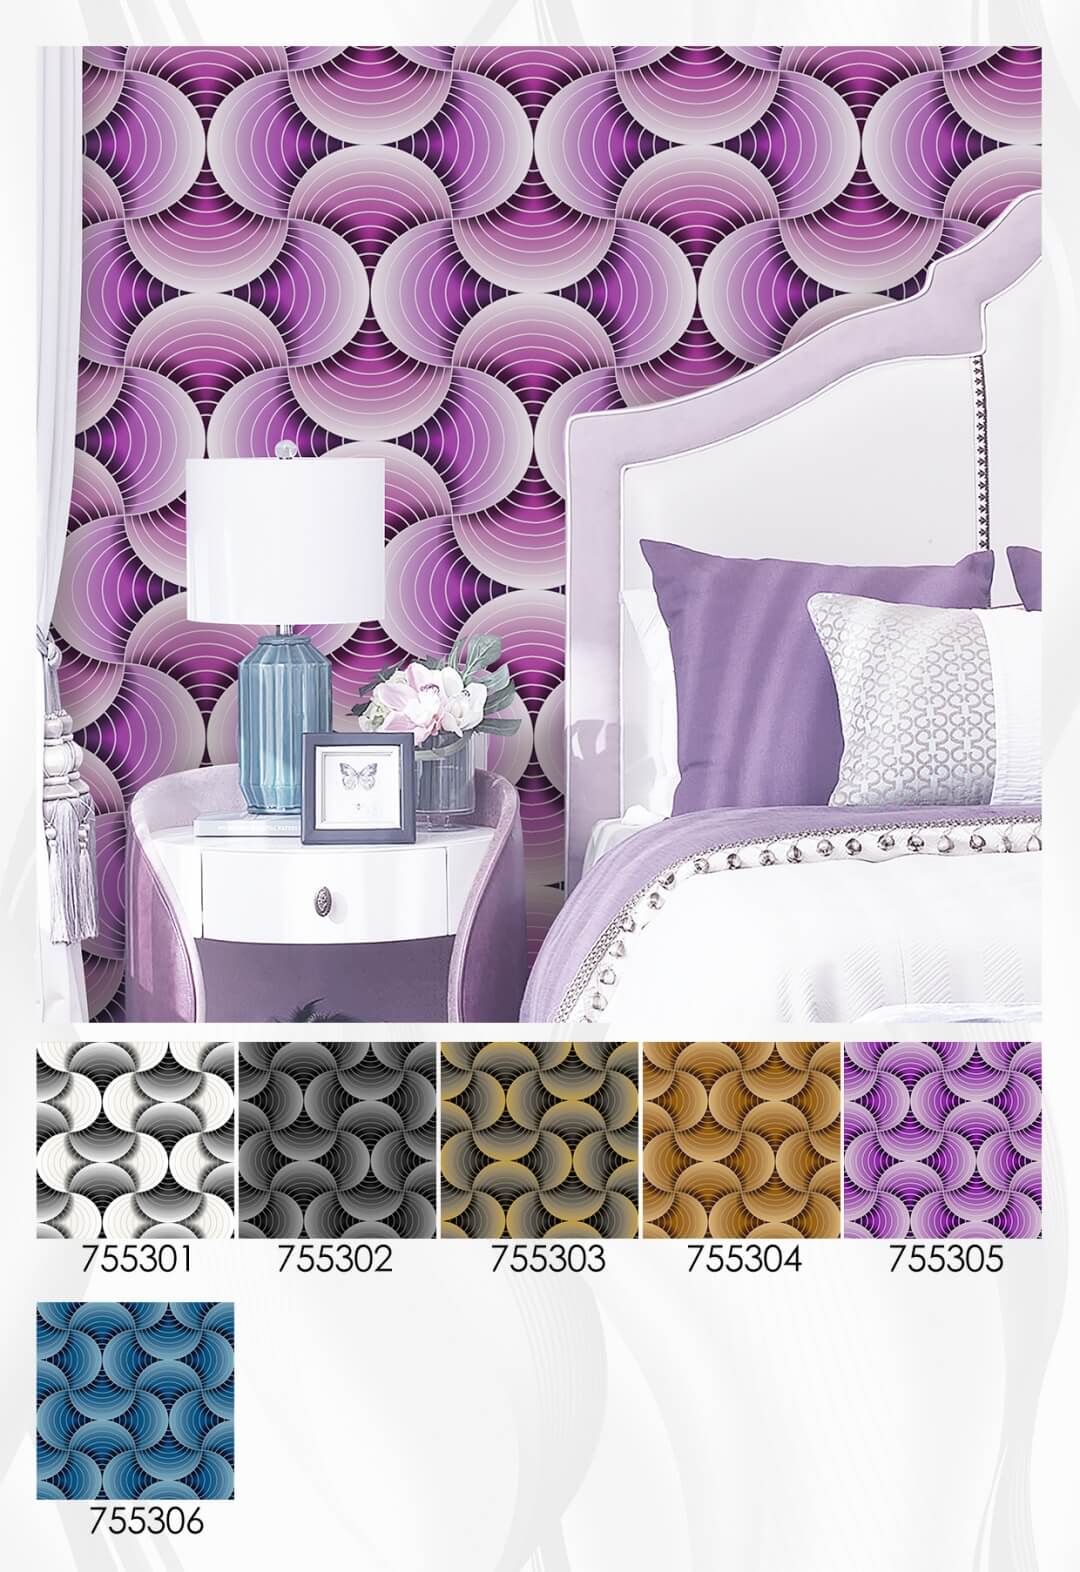 Colorful 3d Butterfly Design Wallpaper for Interior (8)